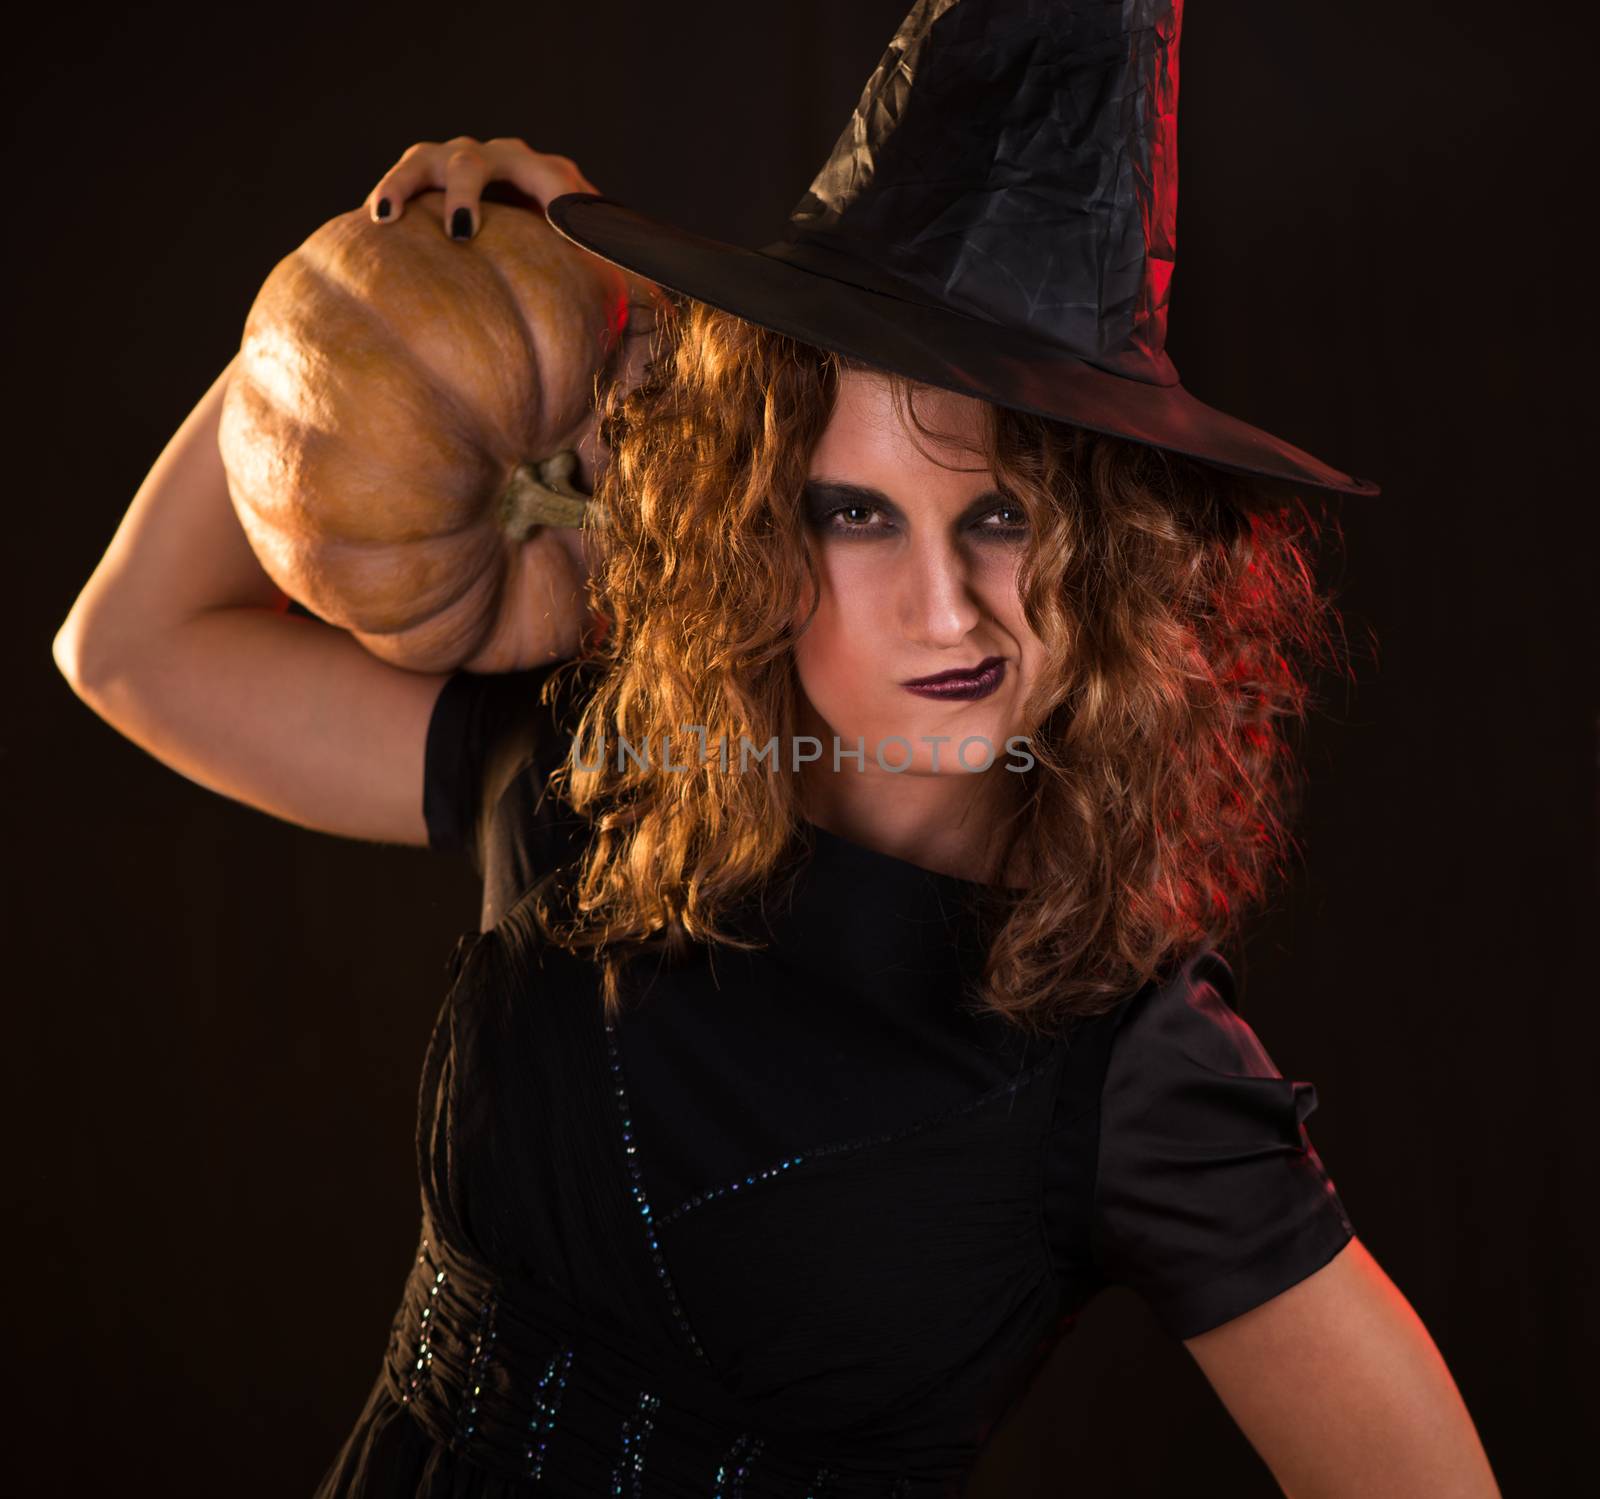 Young woman dressed like a witch. She is in dark clothing and holding a pumpkin.